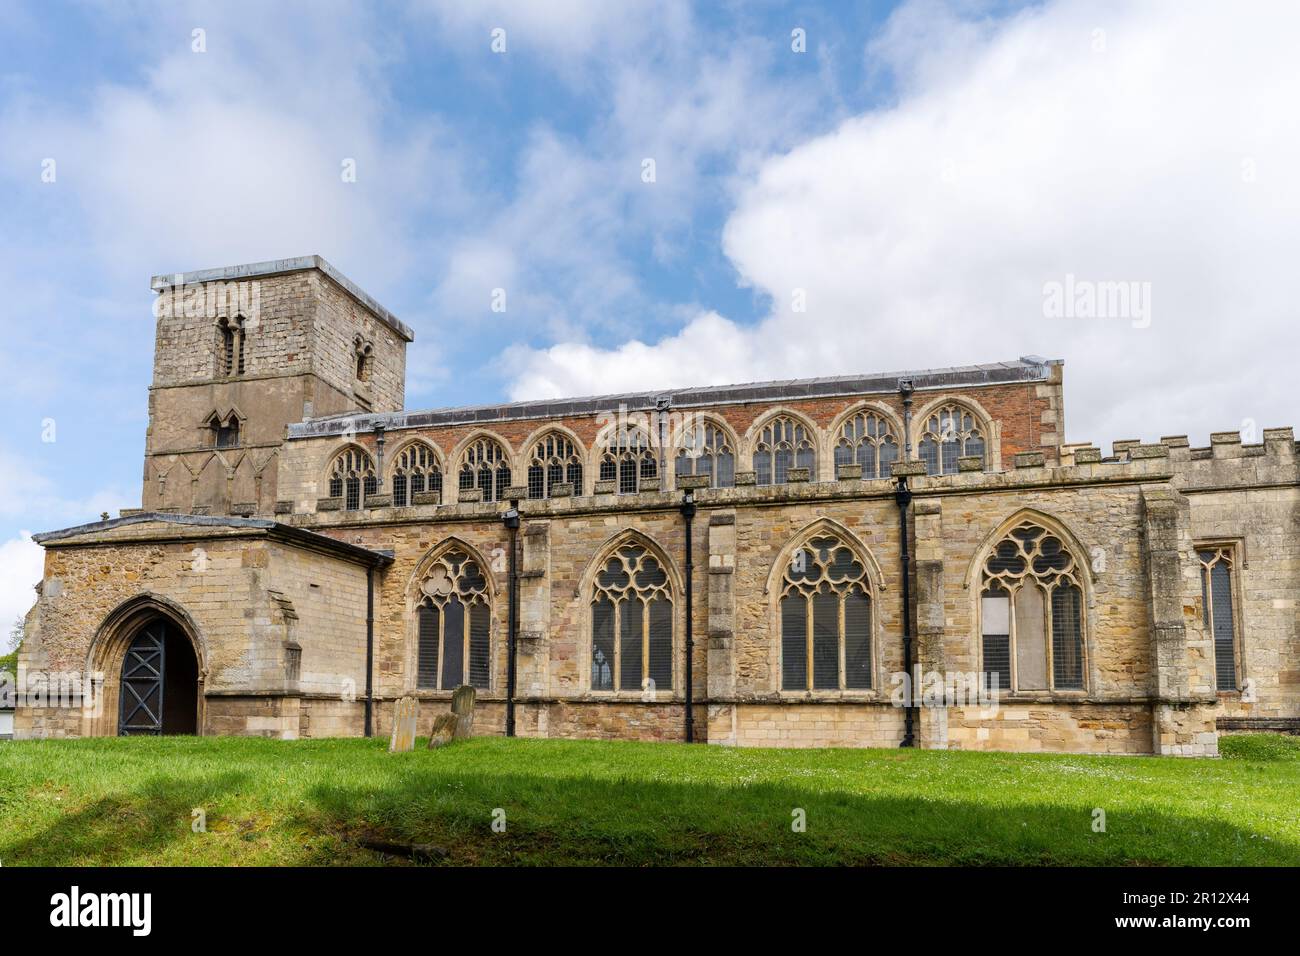 St Peter's Church, an Anglo Saxon building in the care of English Heritage in Barton-upon-Humber, North Lincolnshire, UK. Stock Photo